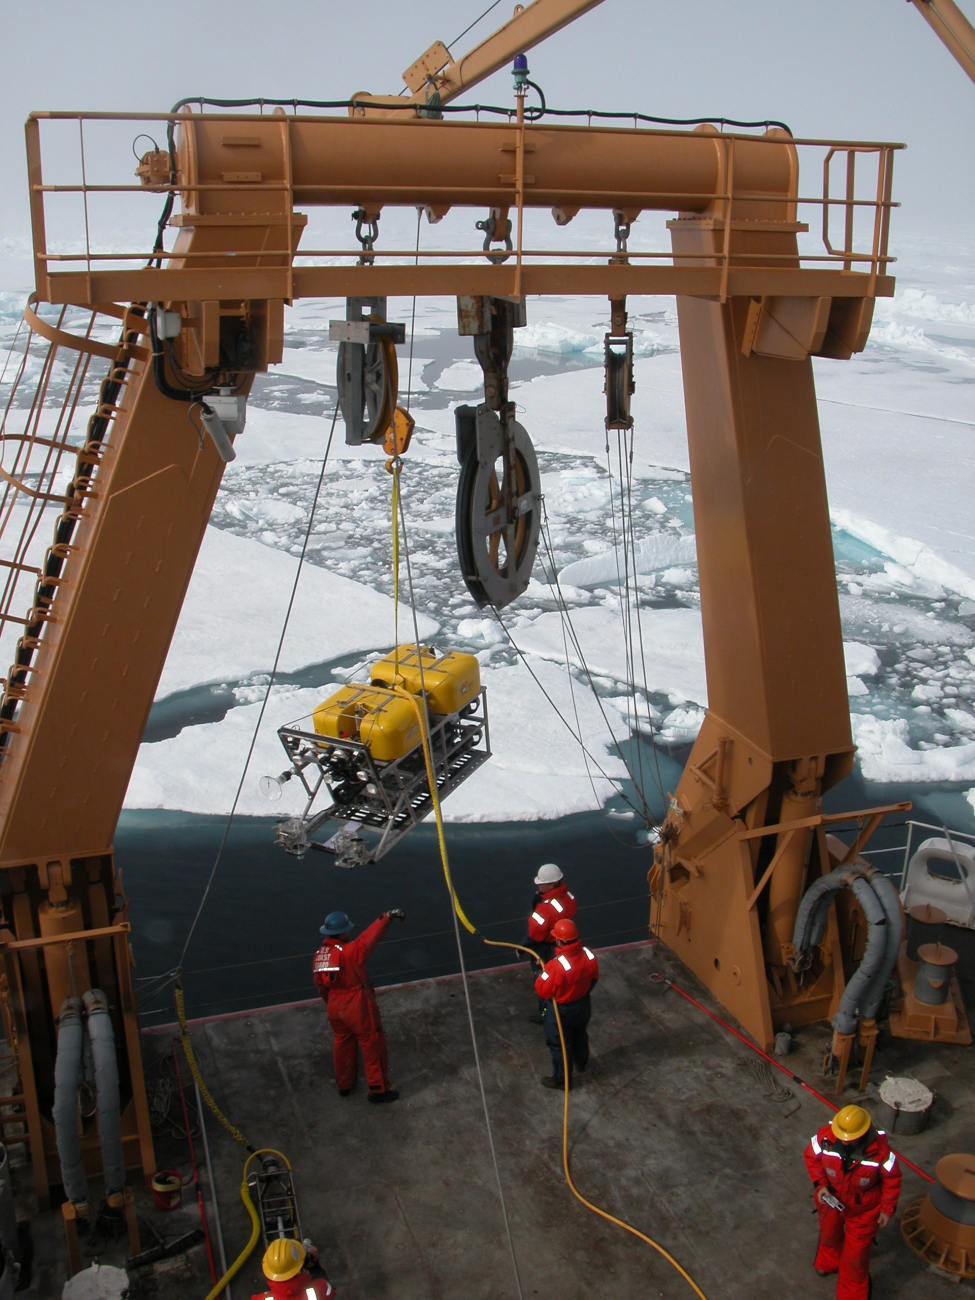 The ROV is deployed off the back of the boat using the Healy's A-Frame